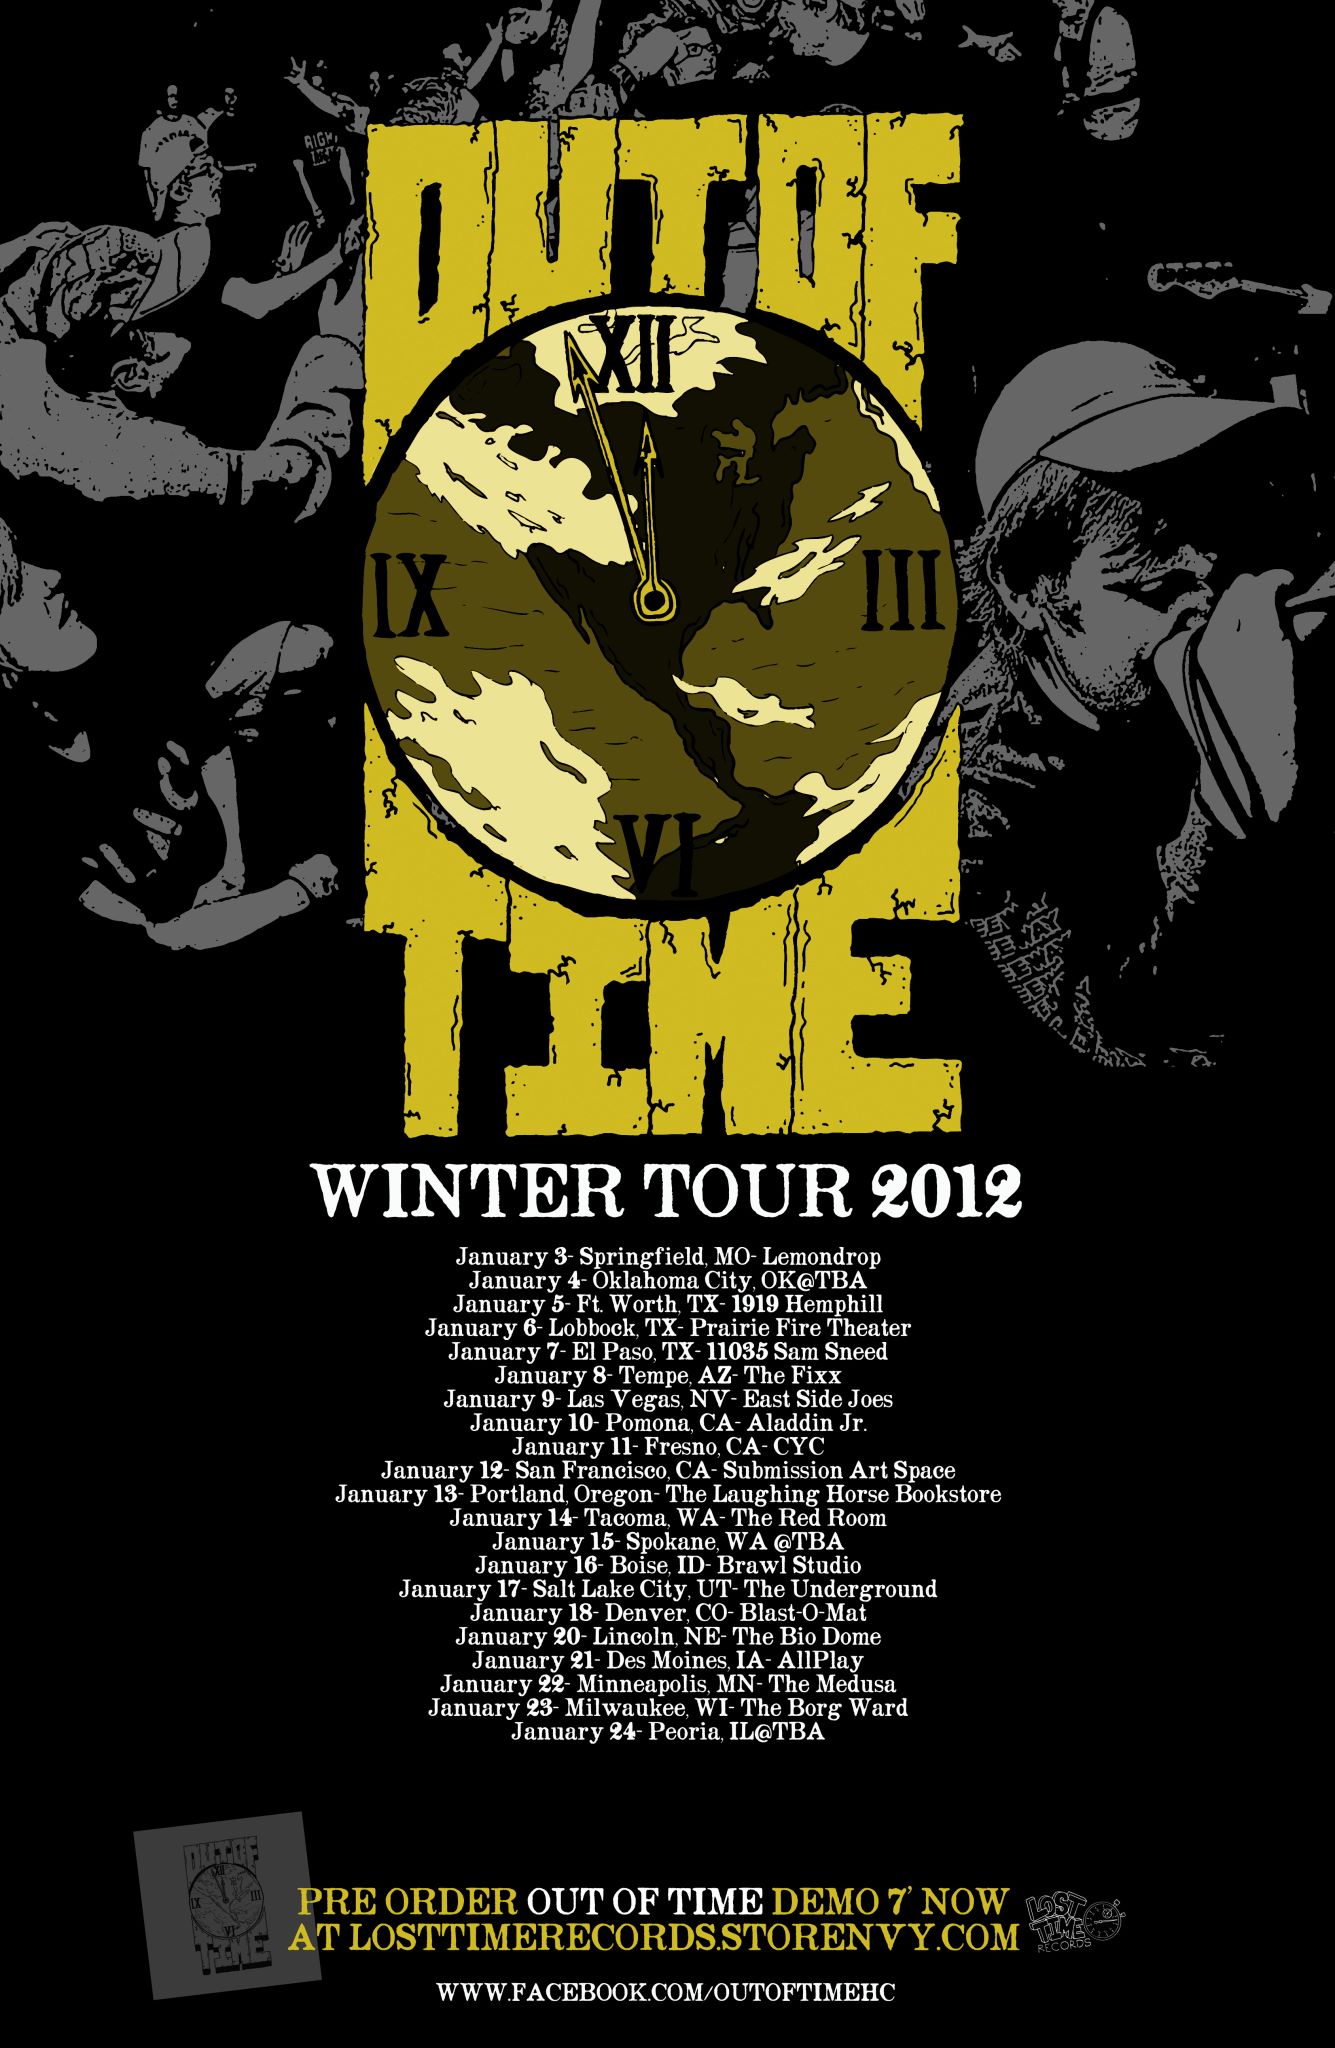 Out Of Time tour dates